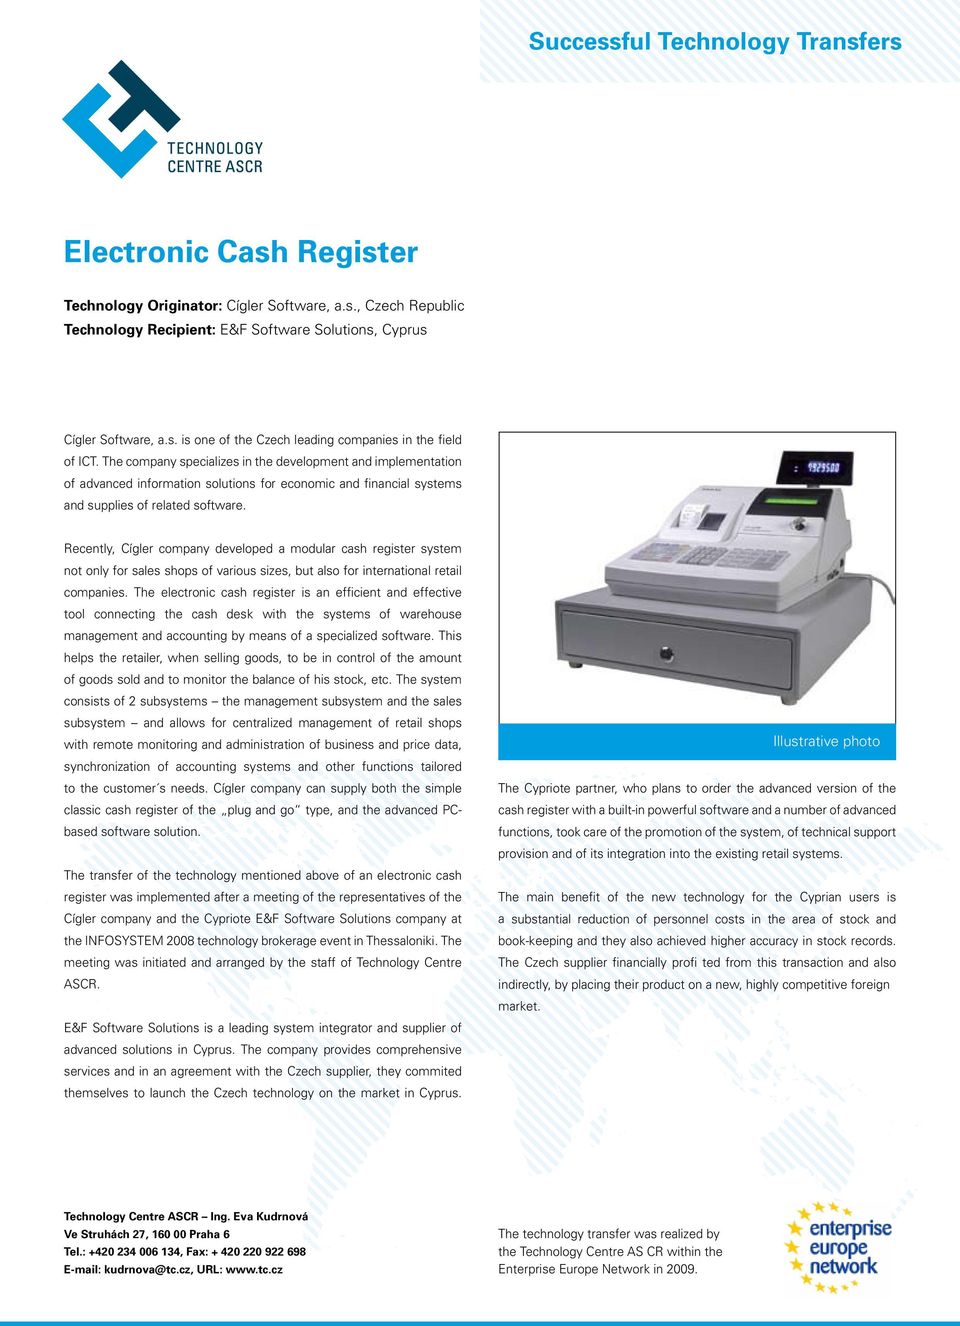 Recently, Cígler company developed a modular cash register system not only for sales shops of various sizes, but also for international retail companies.